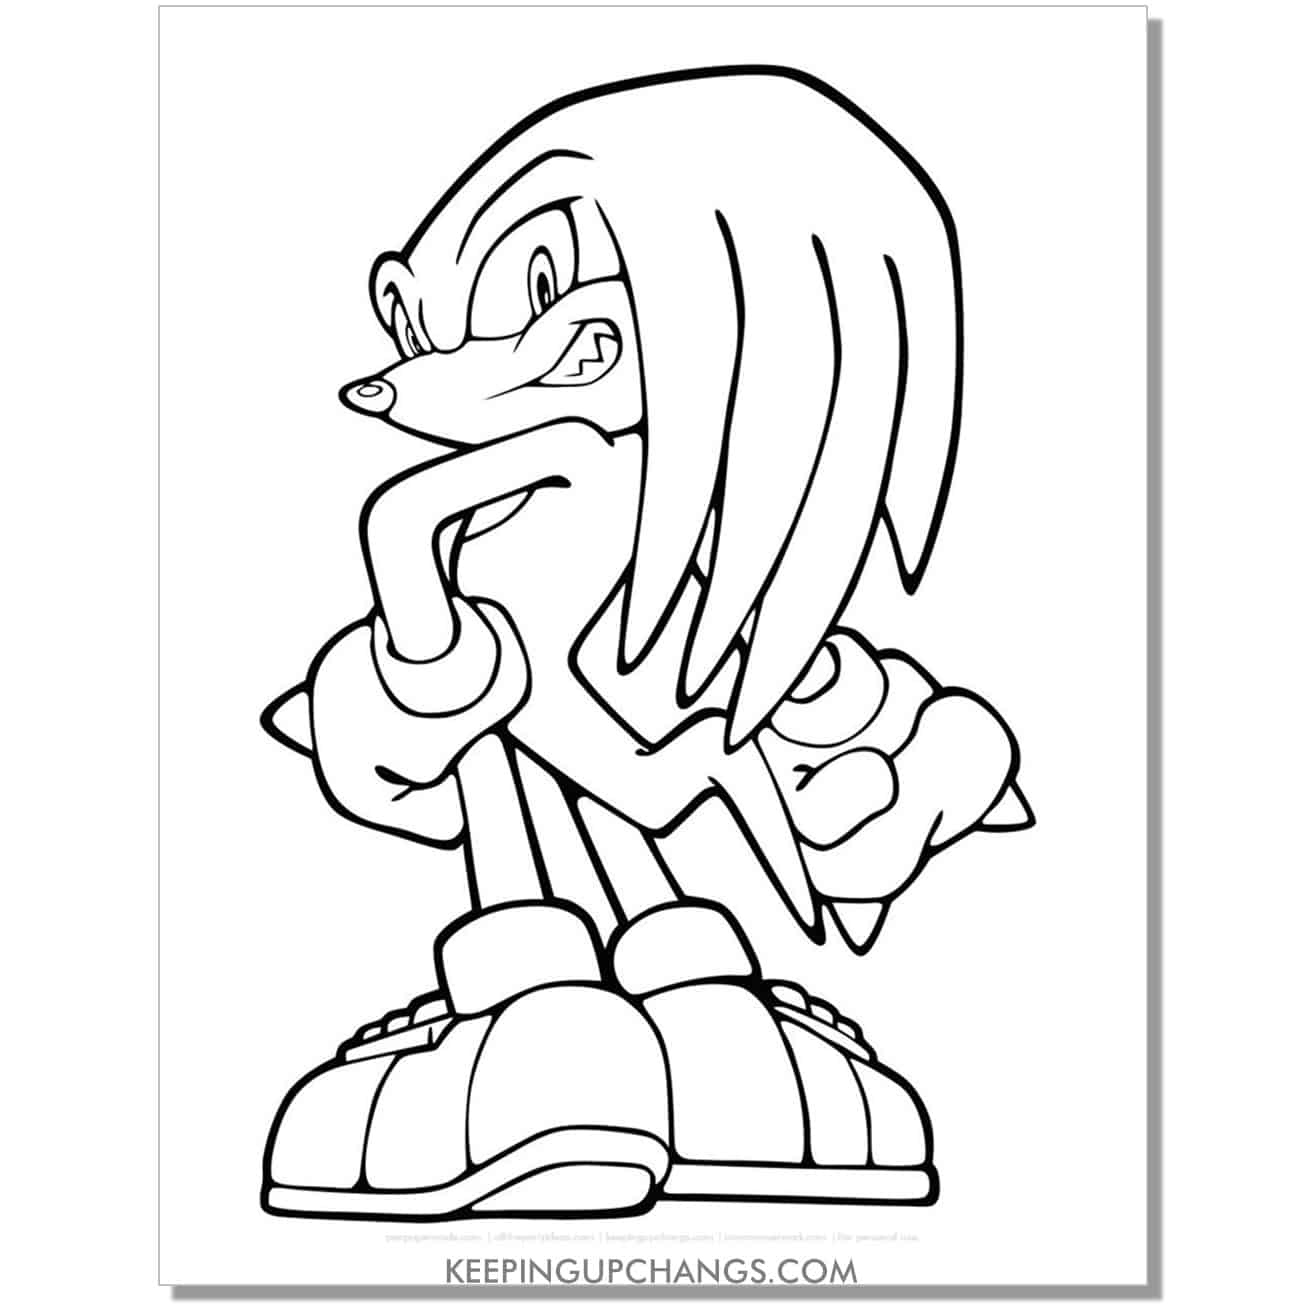 knuckles looking back with smile sonic coloring page.